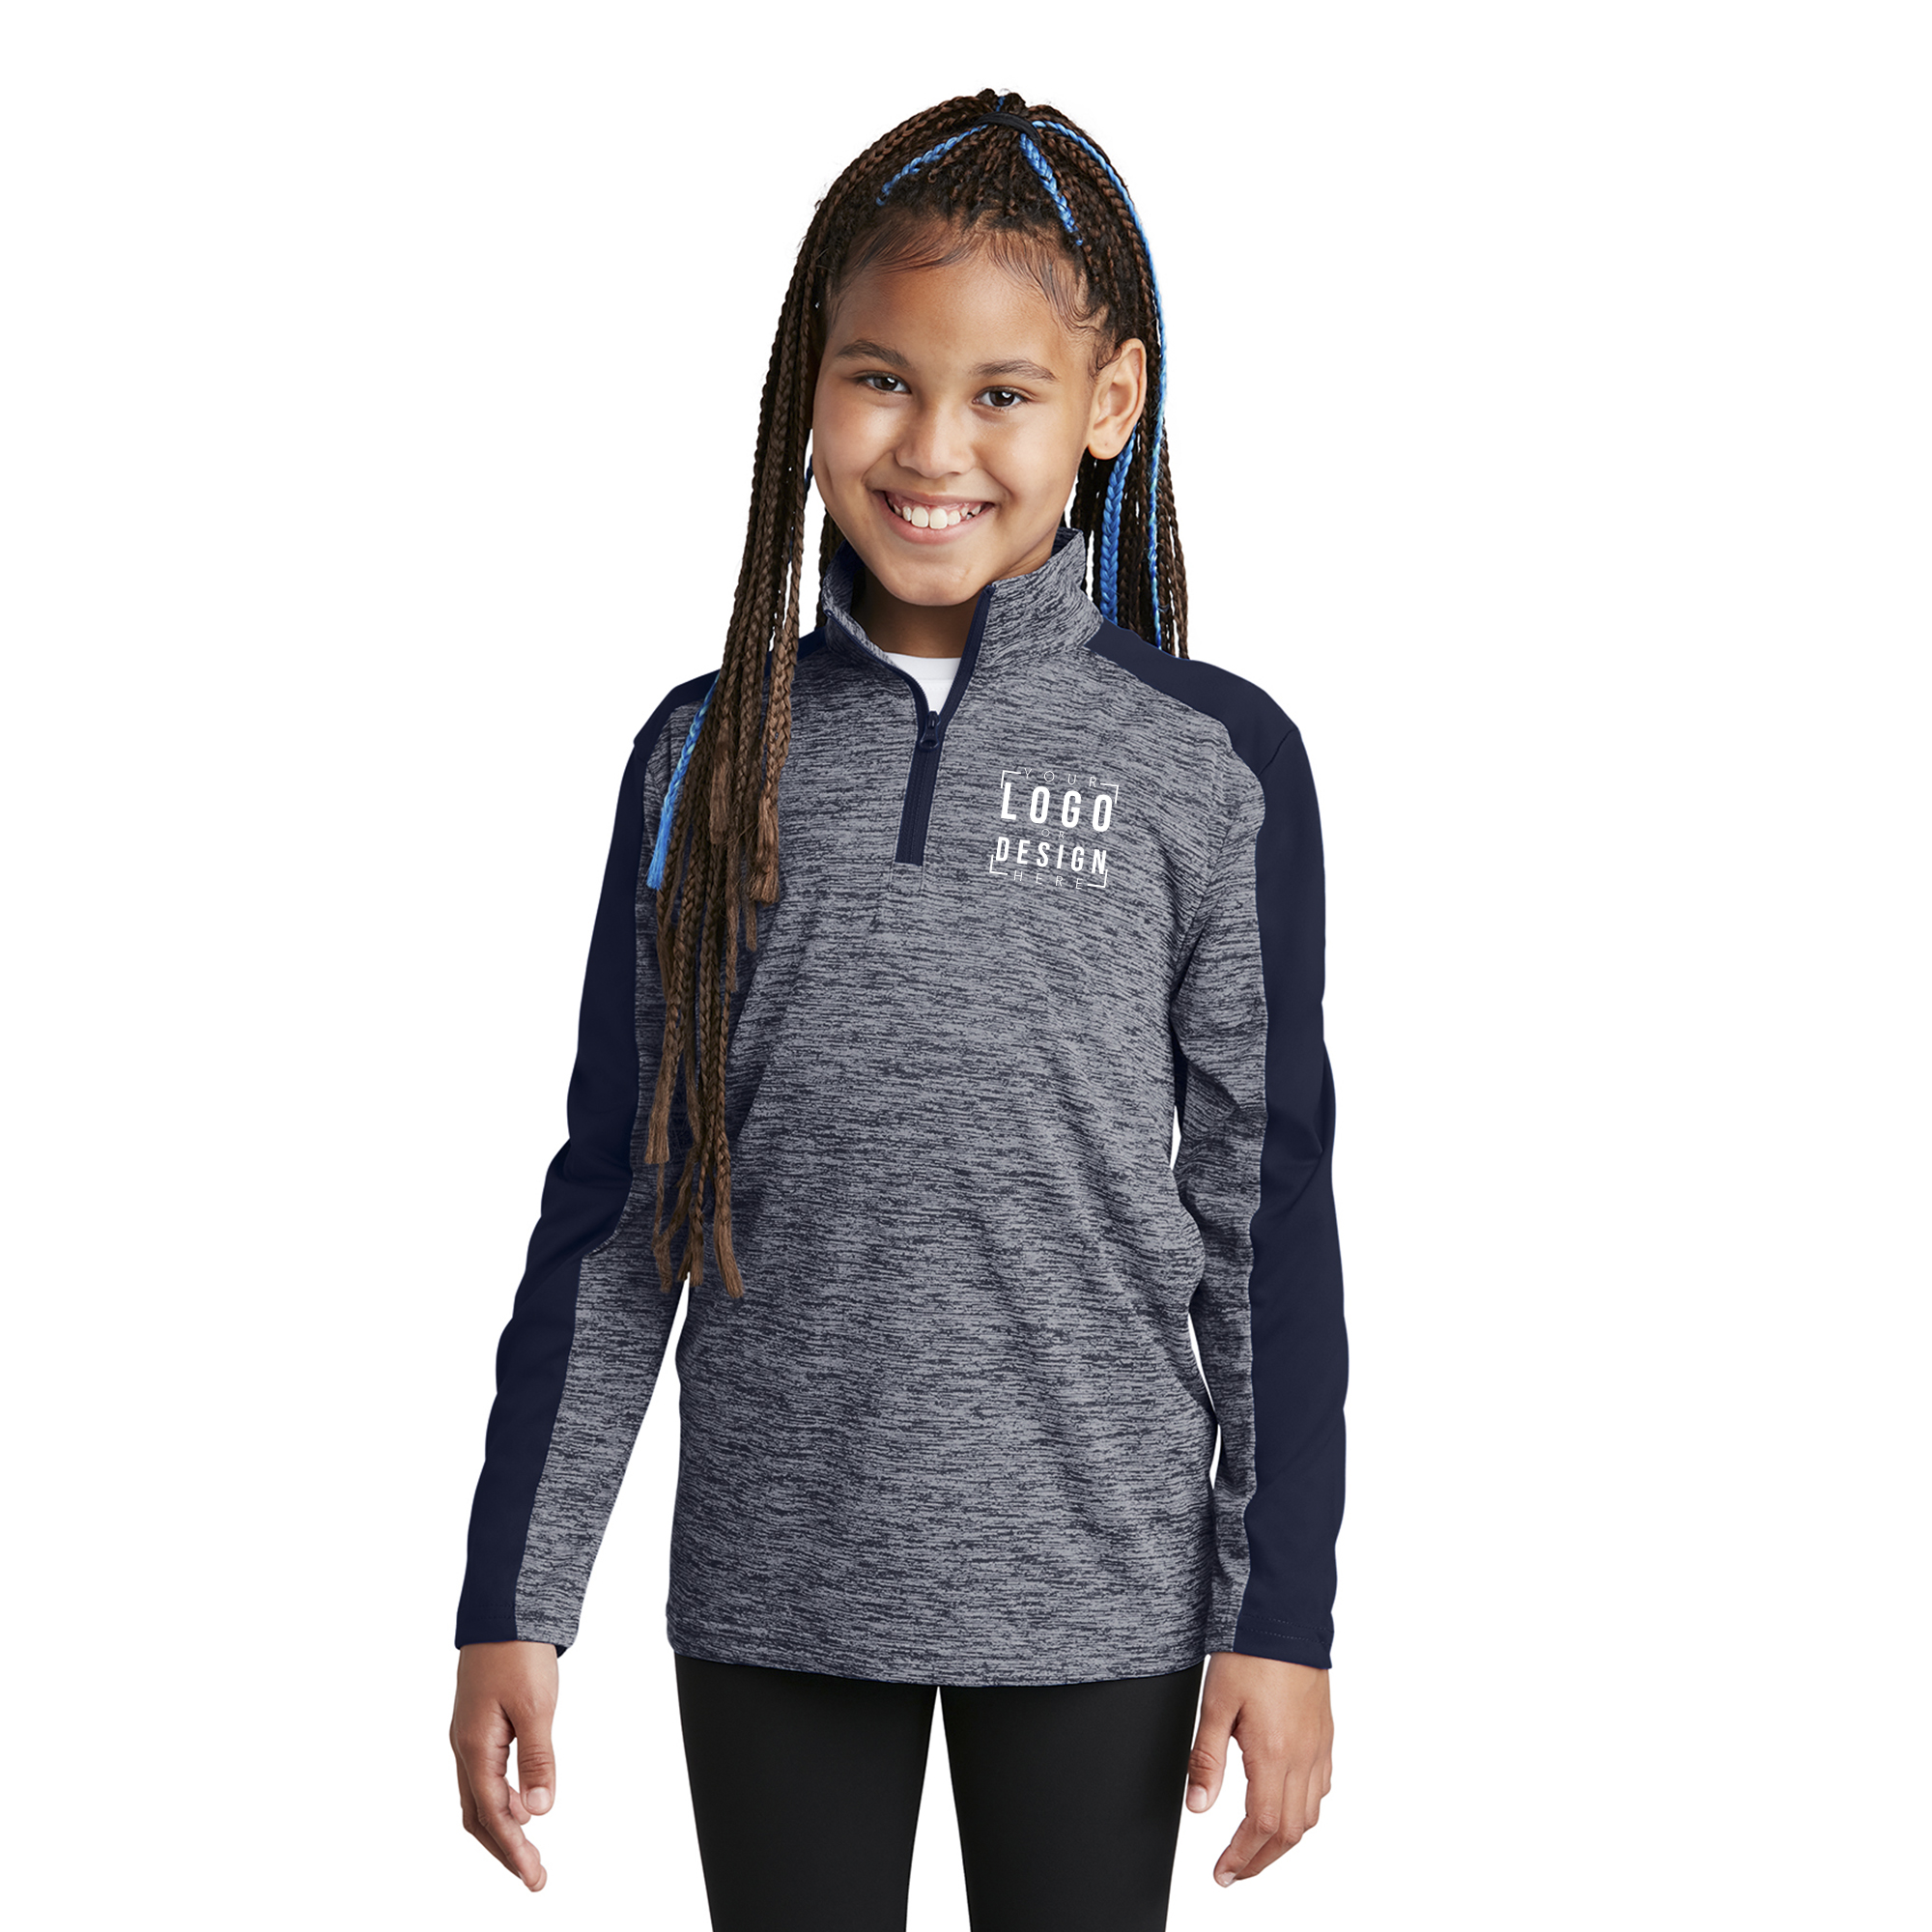 Sport-Tek Youth PosiCharge Electric Heather Colorblock 1/4-Zip Pullover